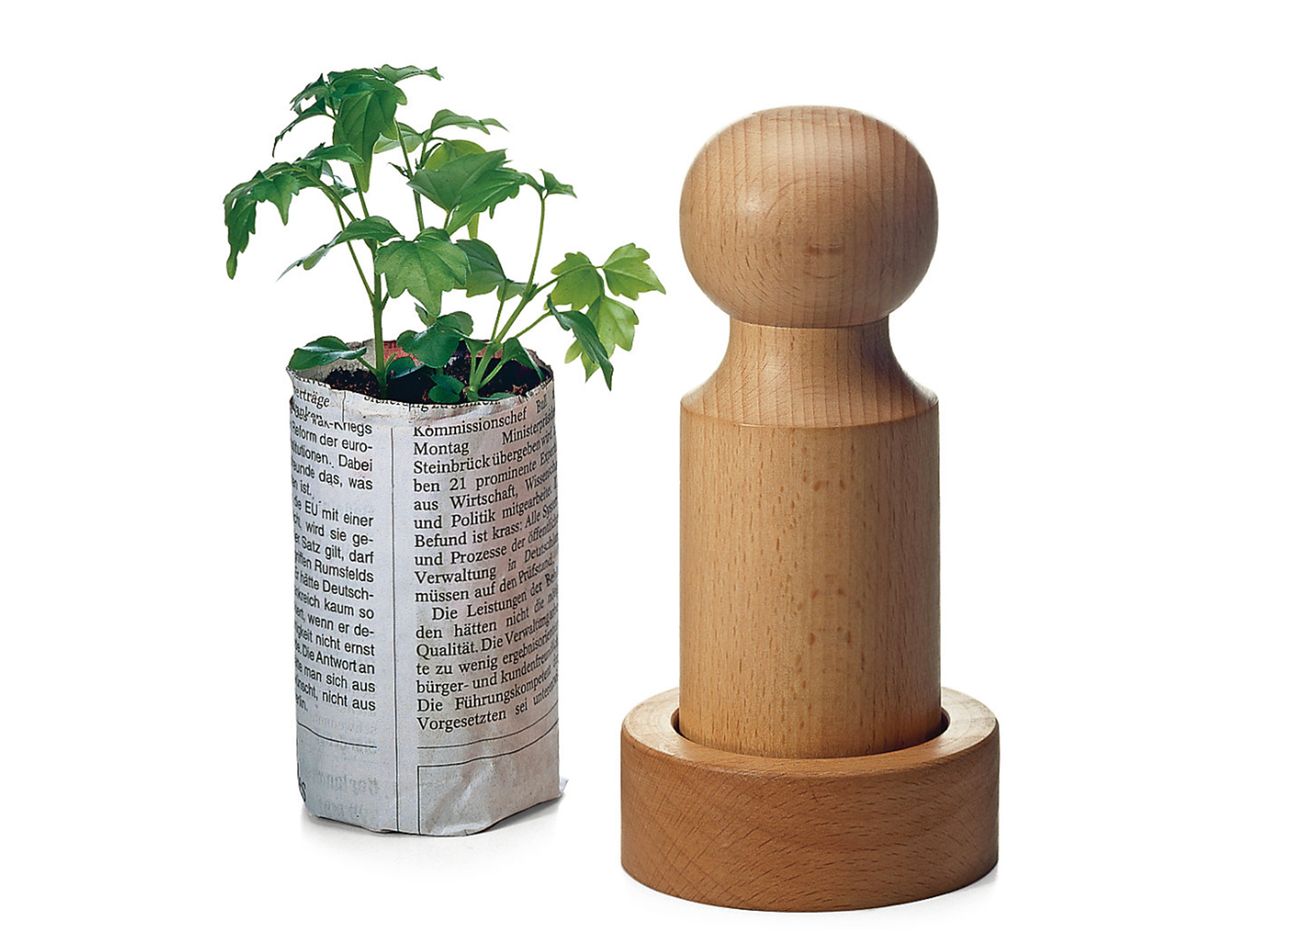 Manufactum's seed pot press next to a seedling.